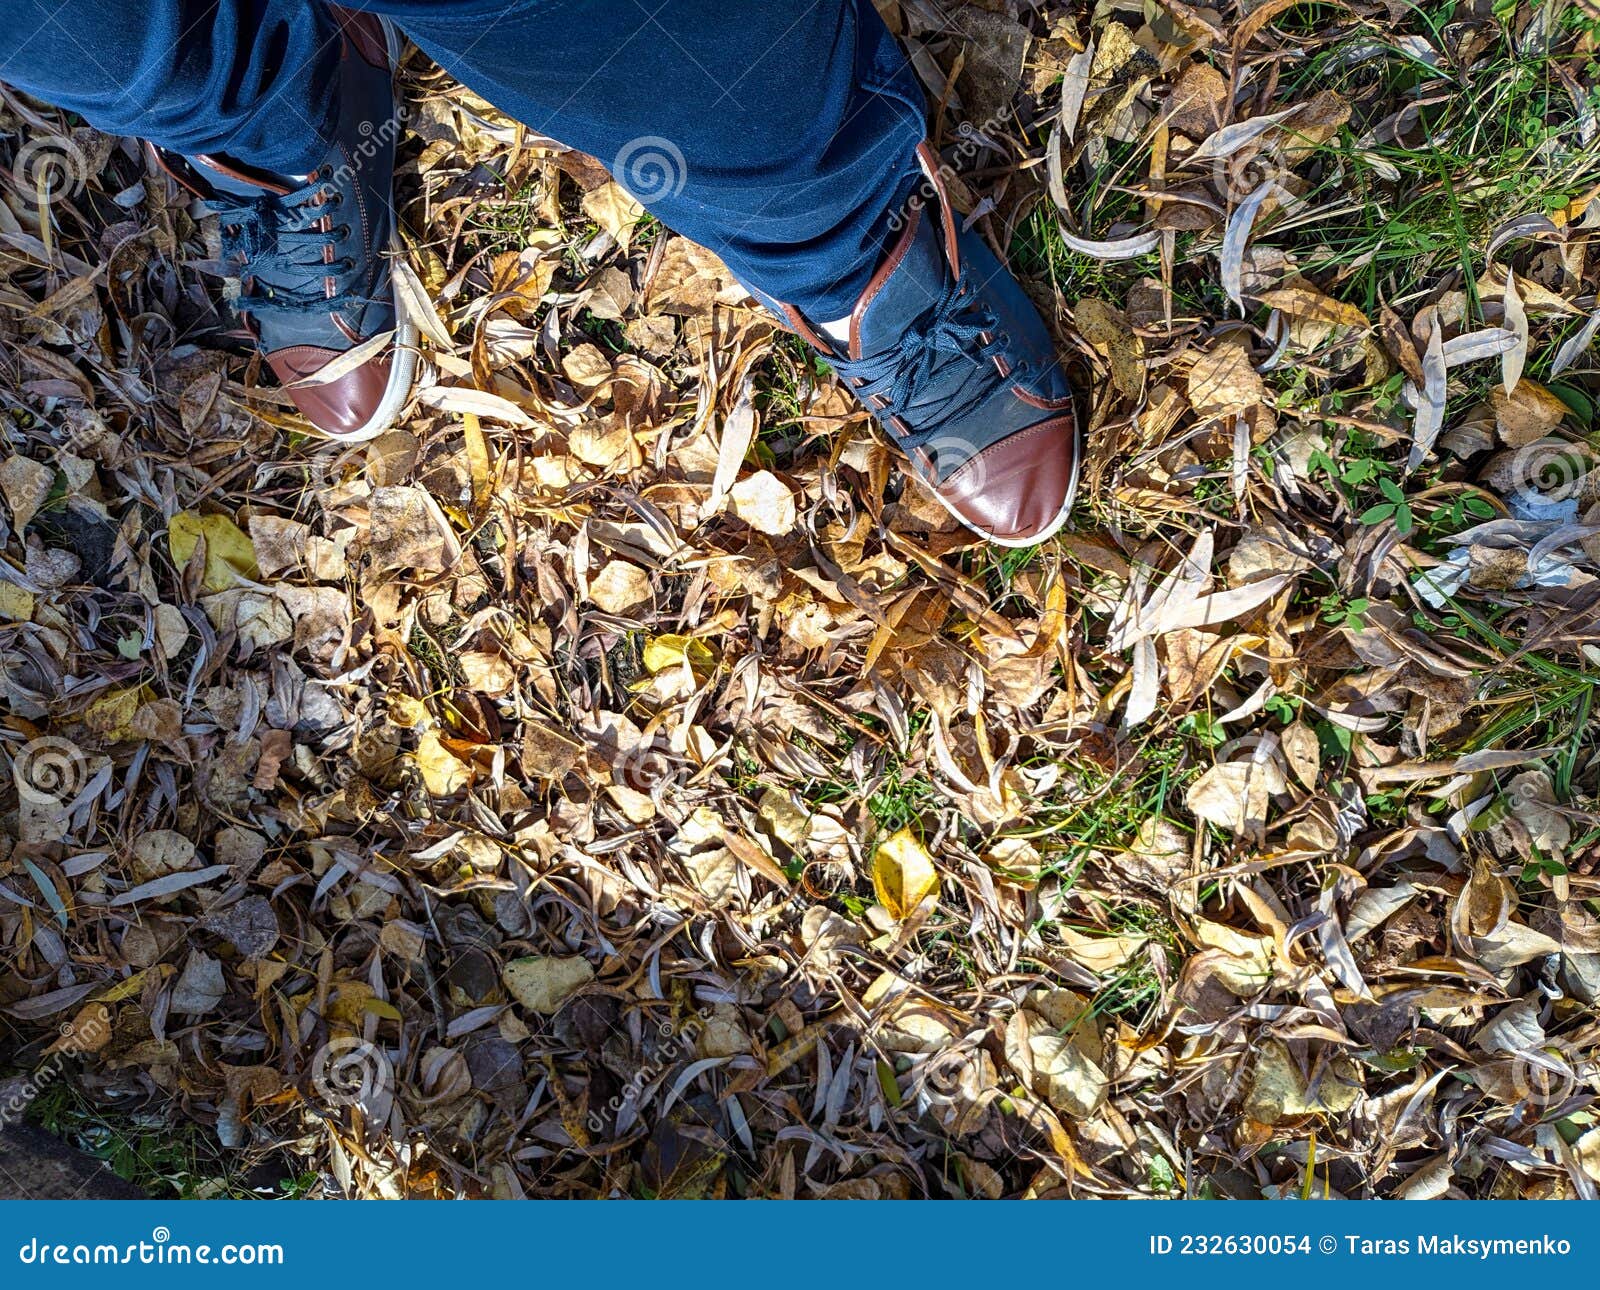 shoes and autumn leaves